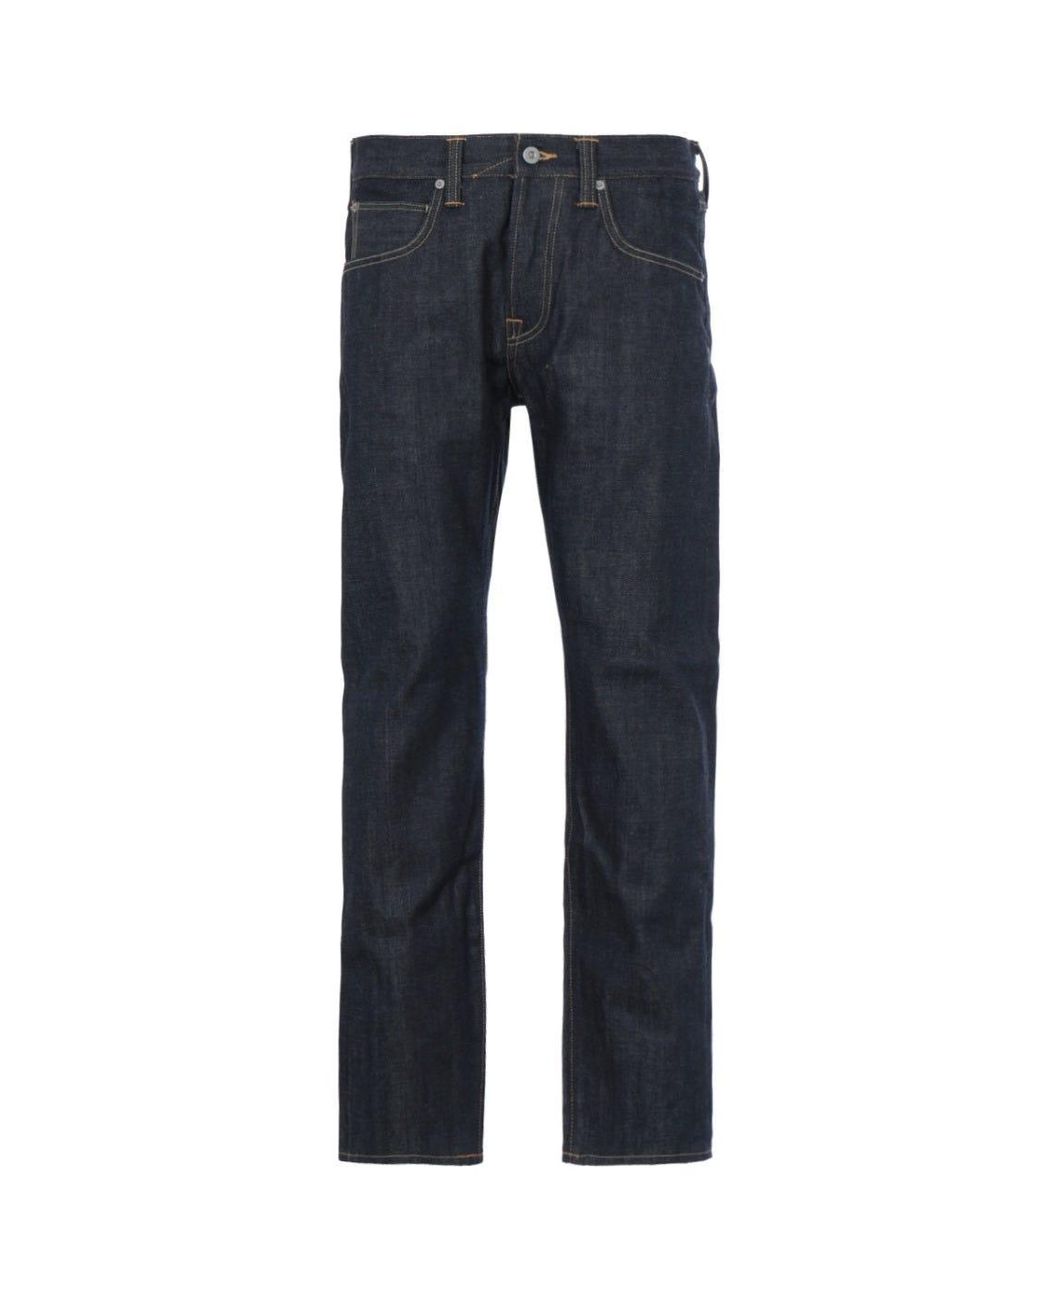 ED-55 Tinted Regular Tapered Selvedge Jeans Black Unwashed Atterley Men Clothing Jeans Tapered Jeans 